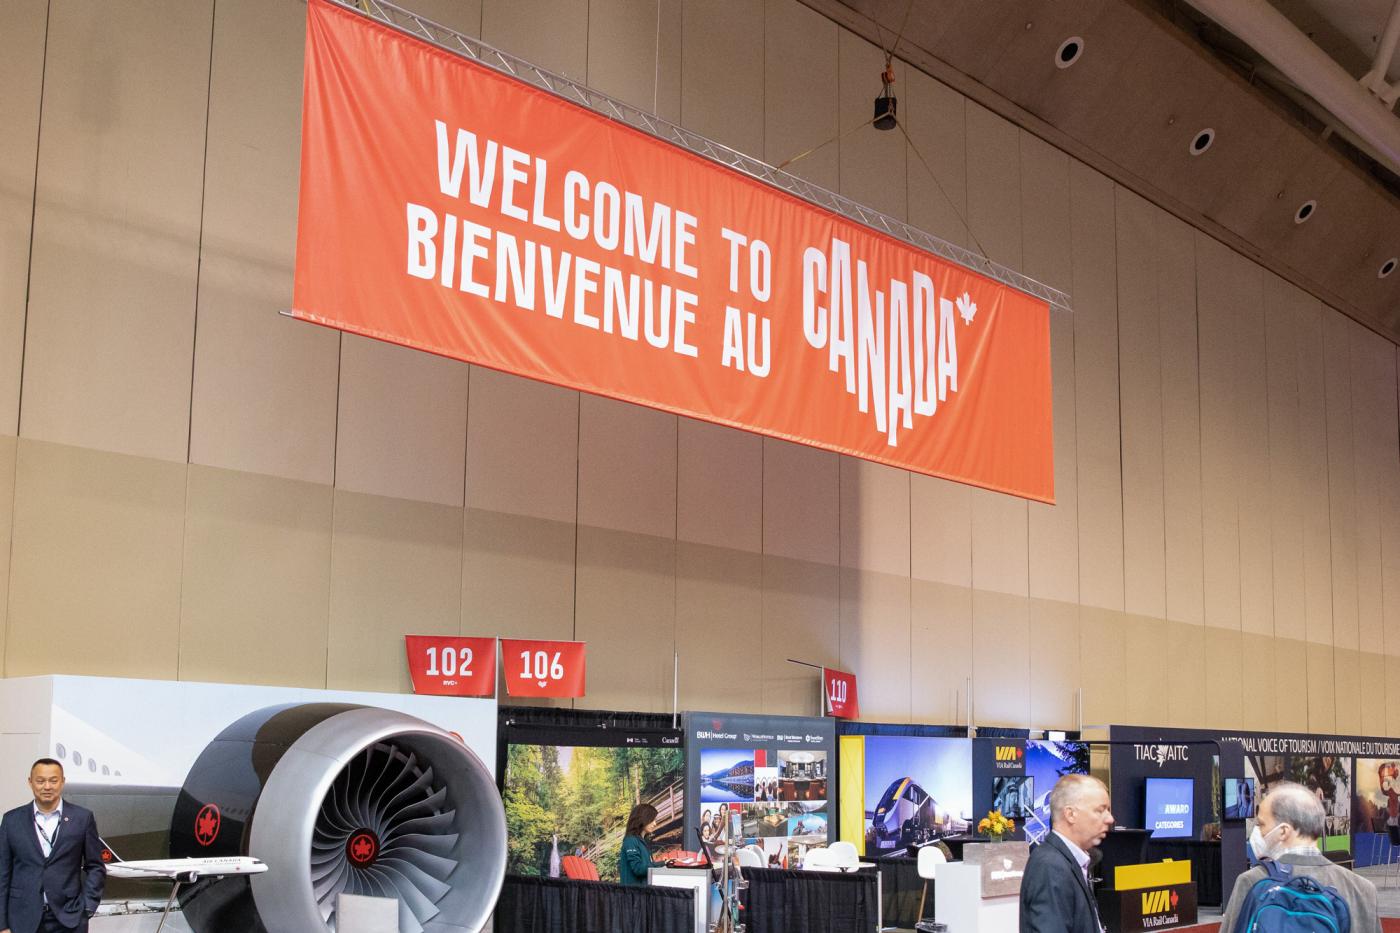 A large red banner hangs in a convention space that says "Welcome to/ Bienvenue au Canada"